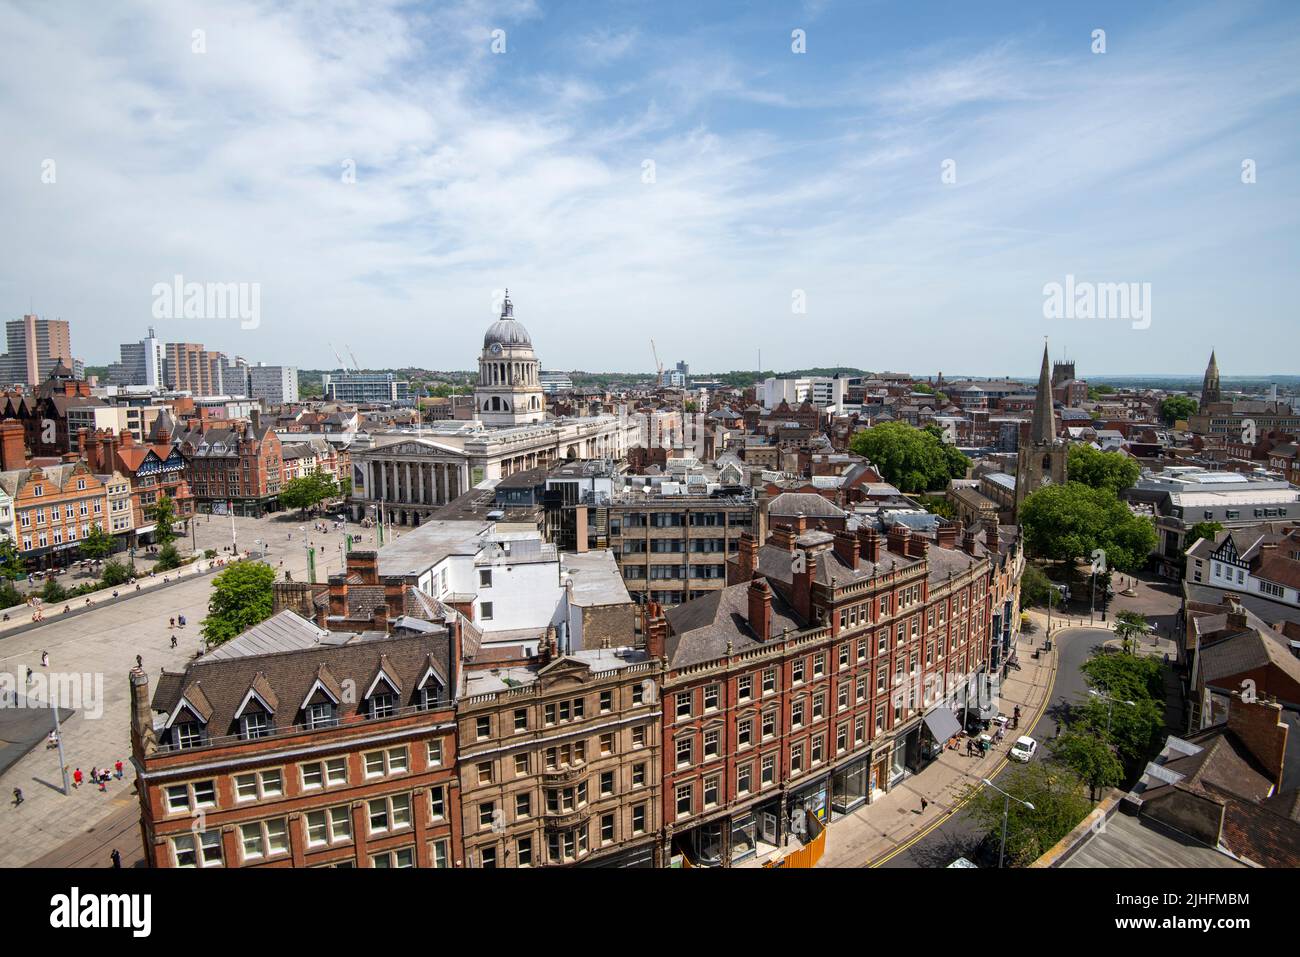 Aerial view of Market Square and Wheeler Gate from the rooftop of the Pearl Assurance Building in Nottingham City, Nottinghamshire England UK Stock Photo